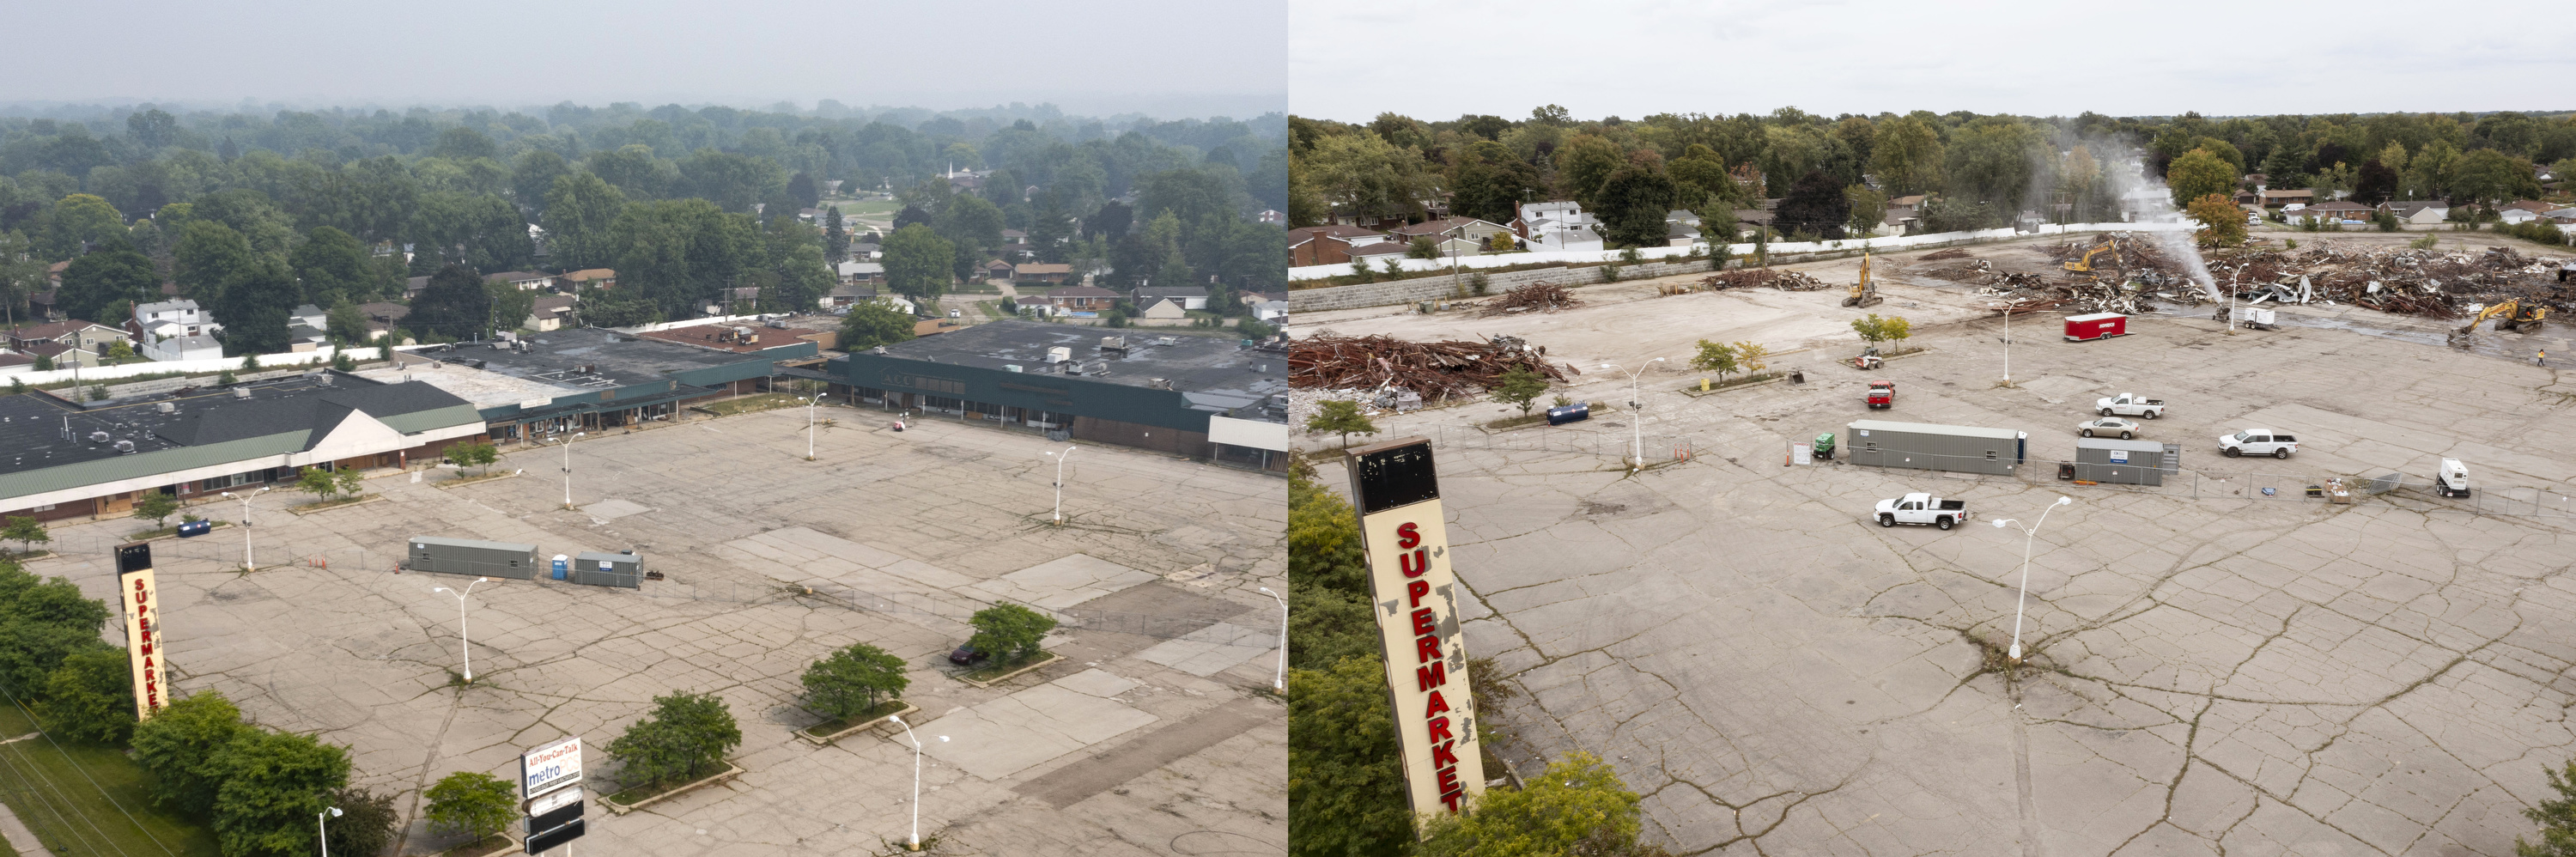 Razed Ypsilanti-area shopping center's owner on the hook for $950K in demolition  cost 